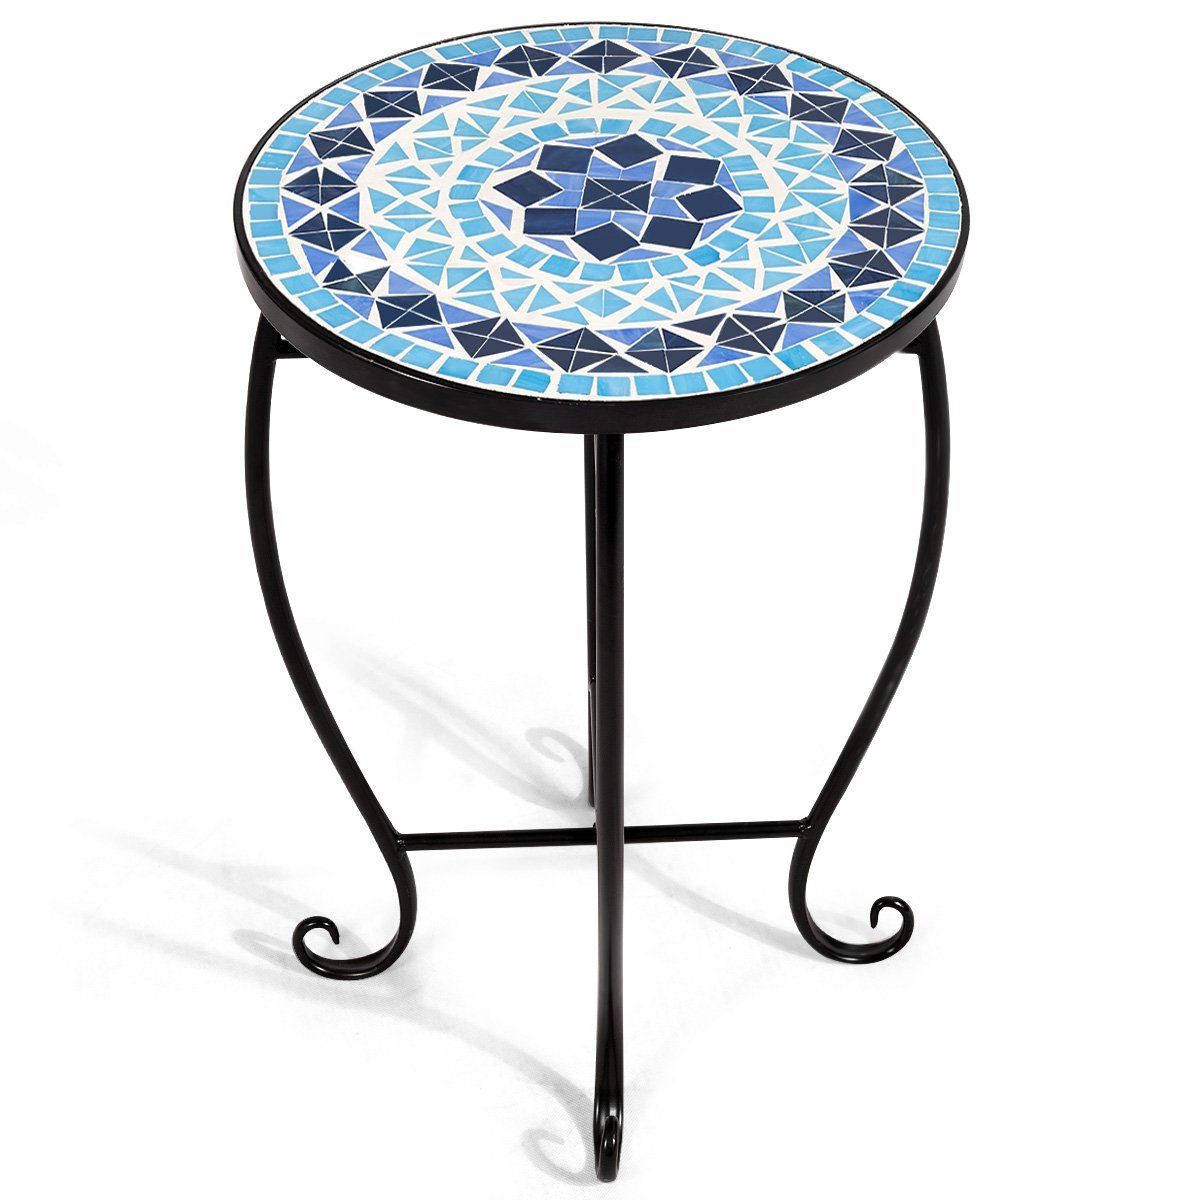 Mosaic Round Side Table Patio (Ocean Fantasy) Pertaining To Blue Mosaic Black Iron Outdoor Accent Tables (View 1 of 15)